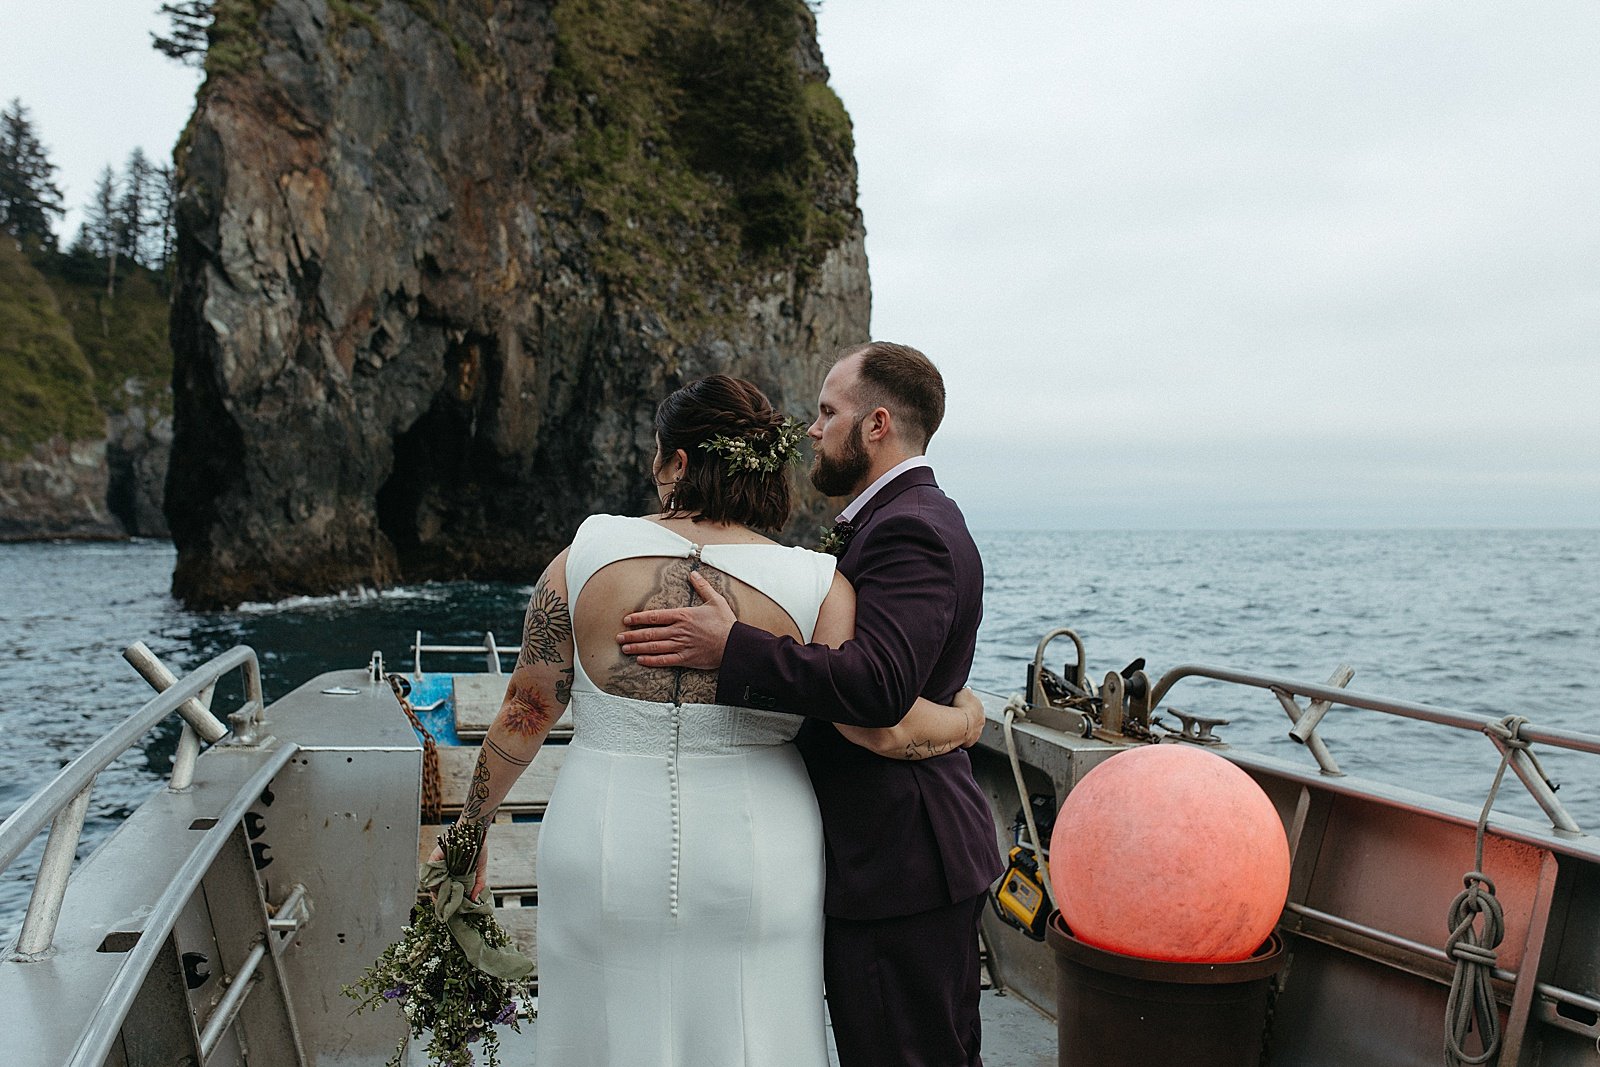  Bride and groom embracing on a boat with mountains around by Rachel Struve Photography 